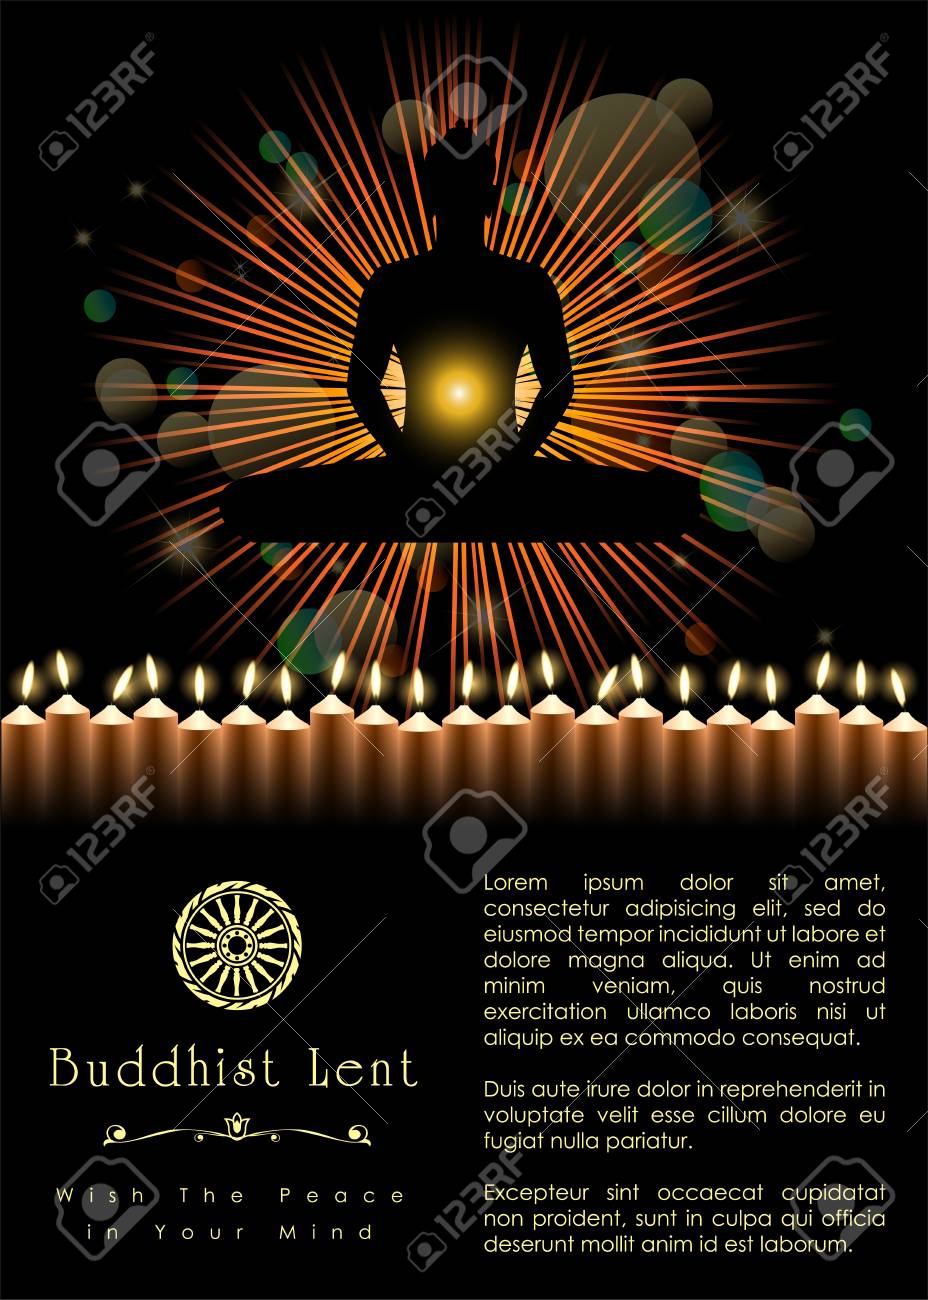 Buddhist Lent Artwork Template Vector And Illustration Royalty